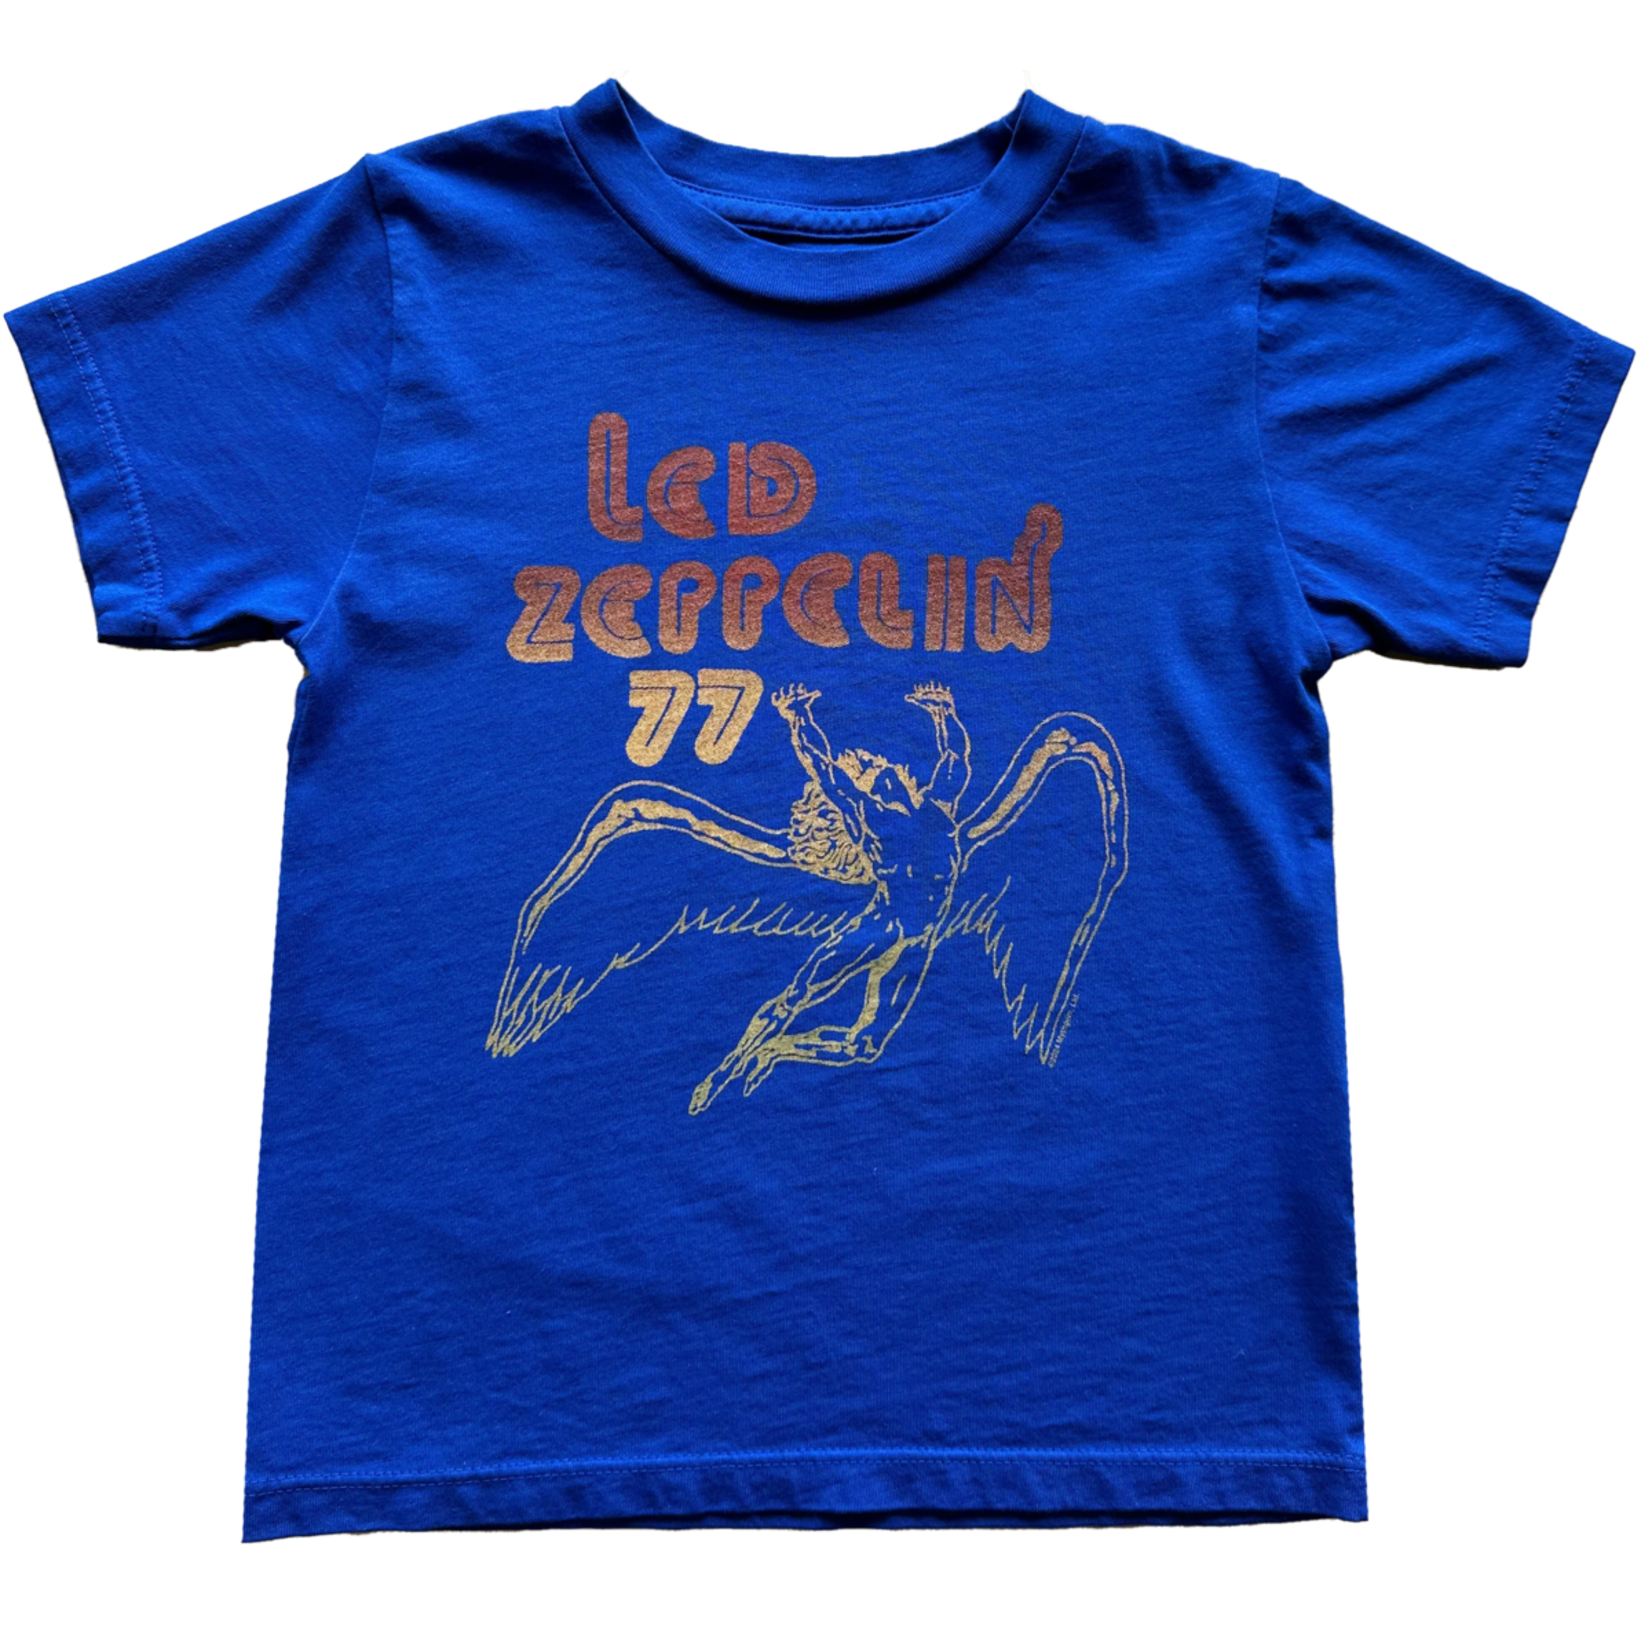 Rowdy Sprout Rowdy Sprout Tangled Up In Blue Led Zeppelin S/S Tee